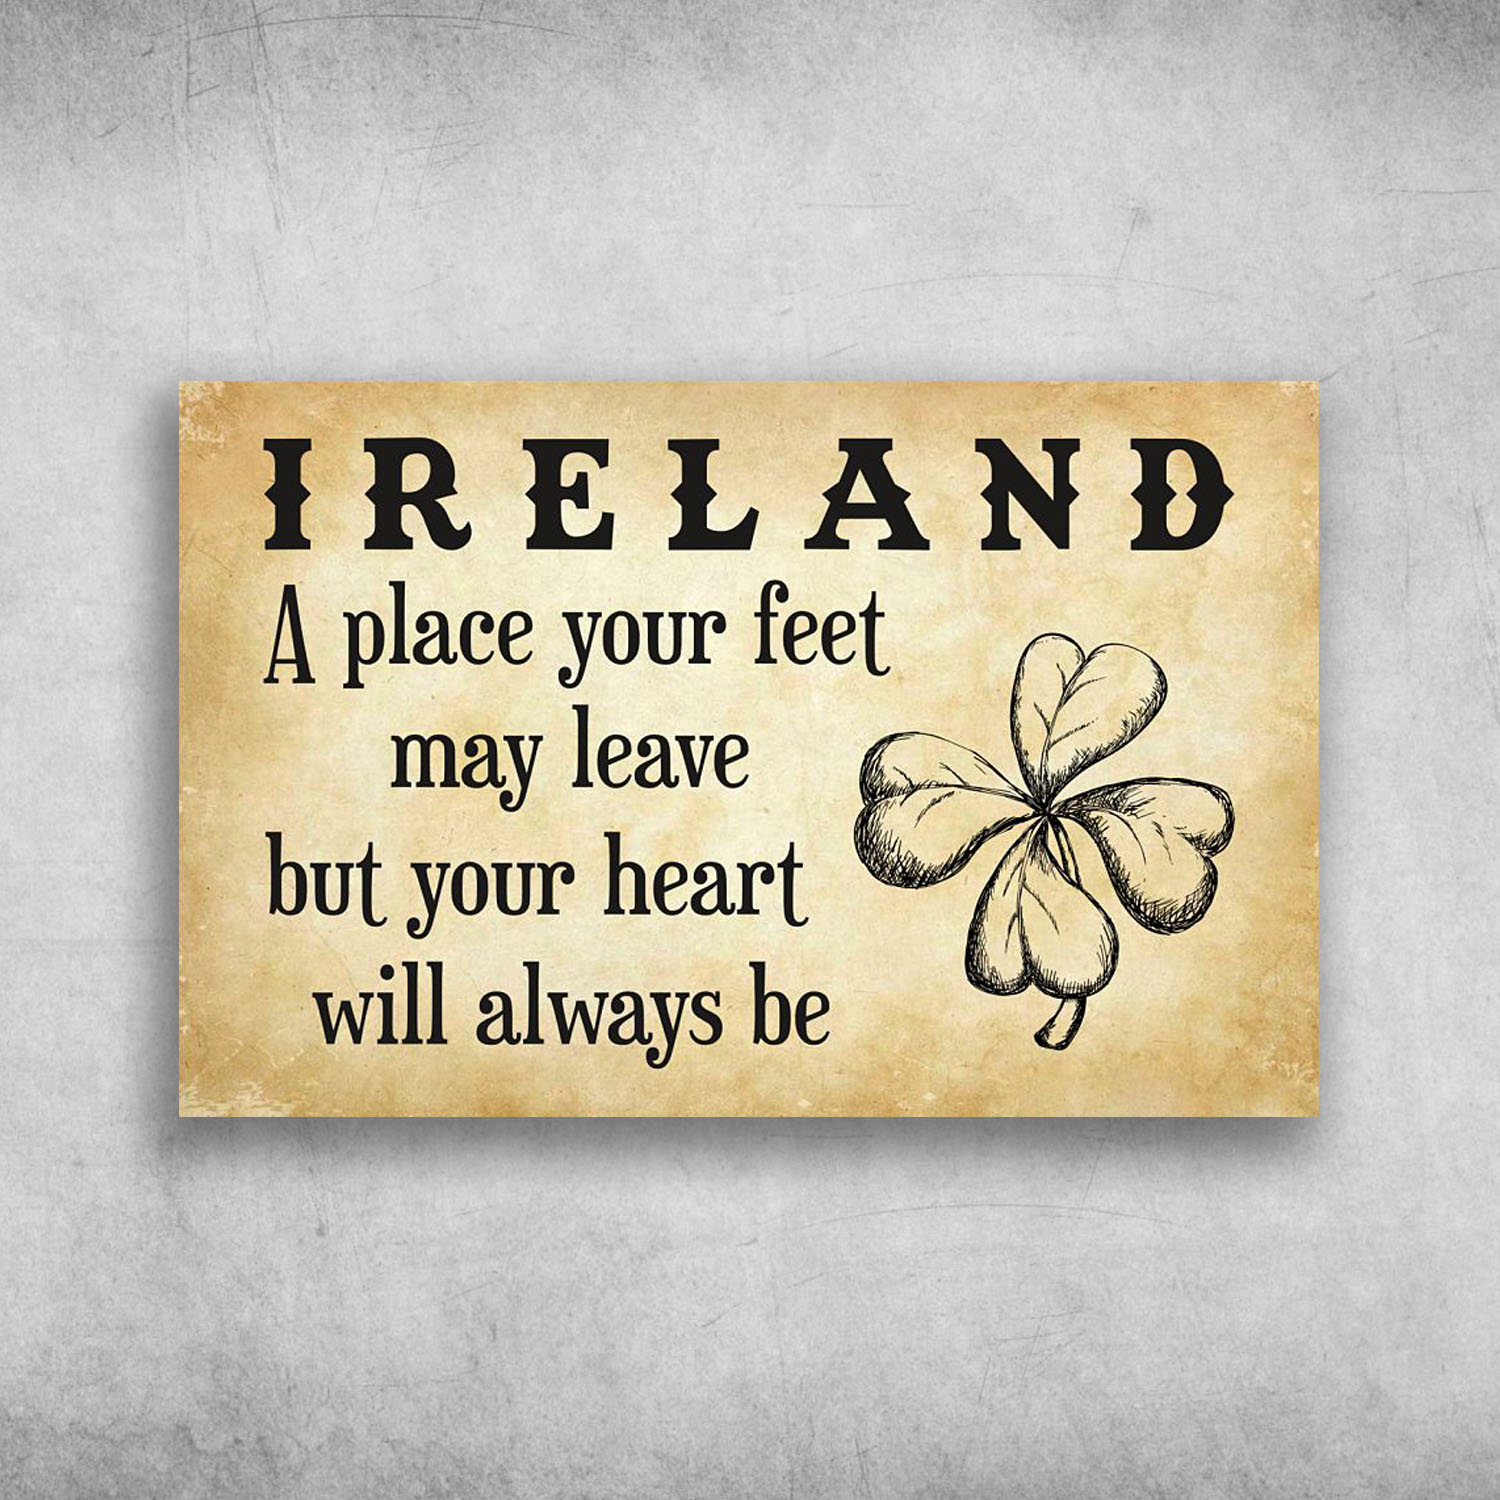 Ireland A Place Your Feet May Leave